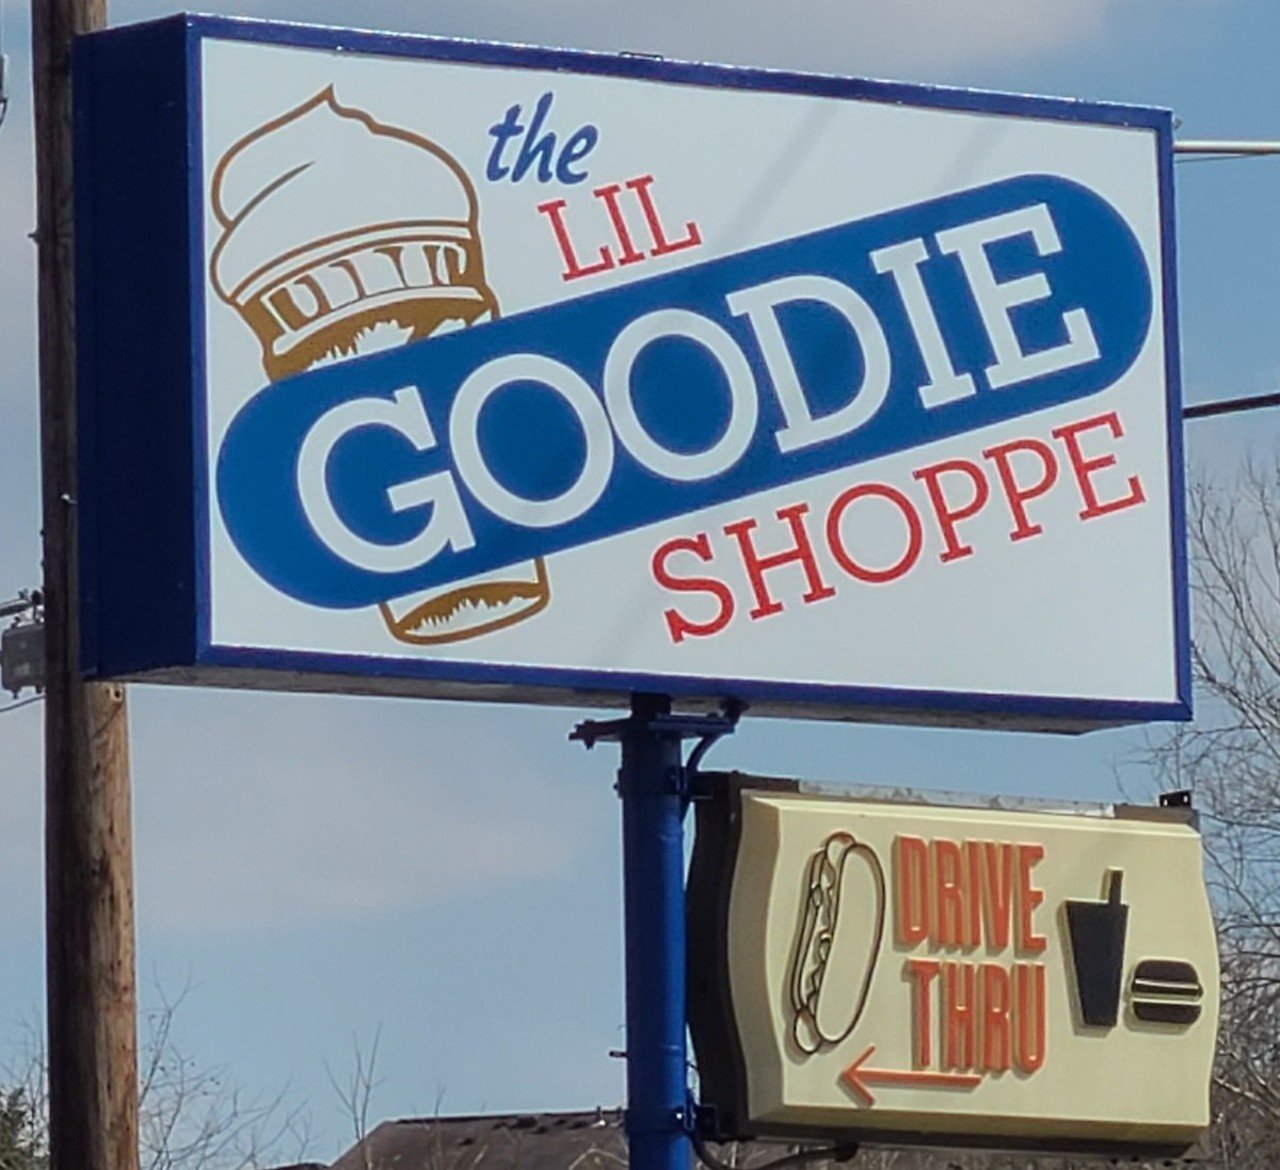 The Lil Goodie Shoppe
7120 Eagle Creek Road, Colerain Township
Open in 1983, The Lil Goodie Shoppe has been run by three generations of women from the Anderson family. Their turtle sundae is a dream come true, and they have an extensive list of ingredients you can add to your flurry, including classic candies like M&Ms, Reese’s Cups and Butterfingers, as well as real fruit. Among their specialty items, you’ll find an adorable clown cup – soft-serve topped with rainbow sprinkles, candy eyes and ears and a cone hat on top – as well as a strawberry shortcake, banana split and Reese’s Cup Parfait. The Lil Goodie Shoppe also has real-deal Slush Puppies that come in 10 flavors, and you can also add Sour Shocker to any of them.